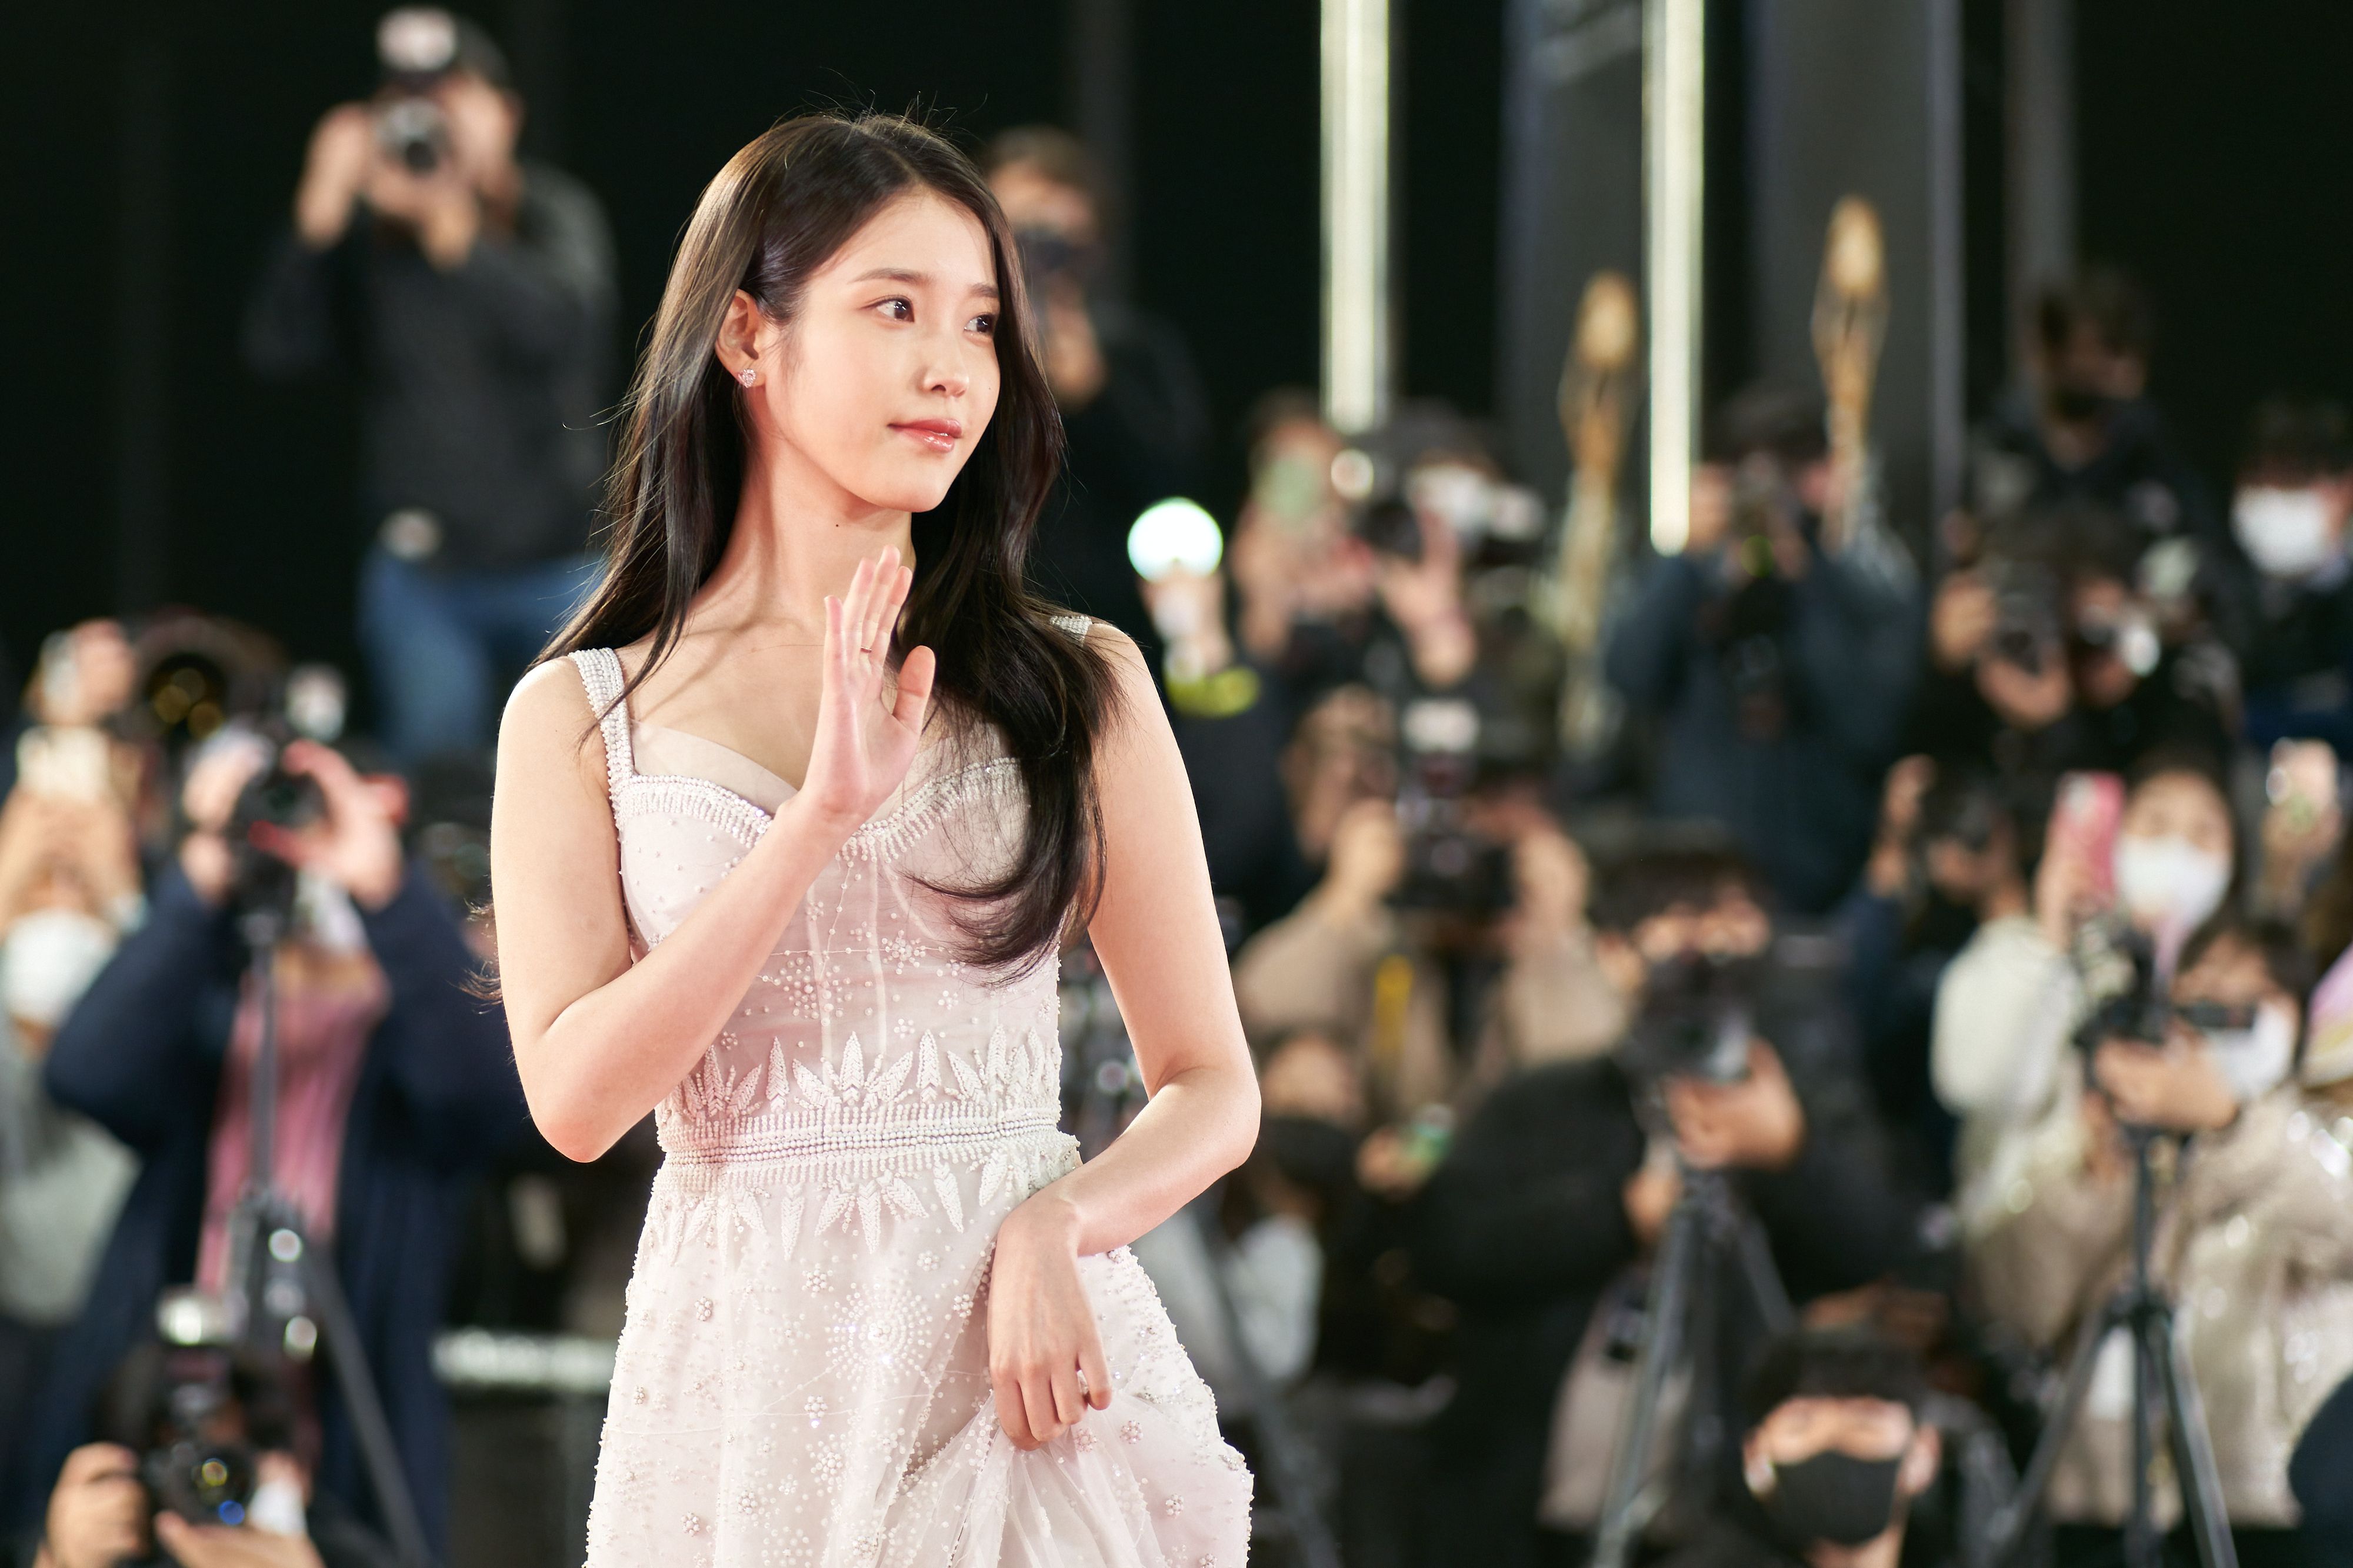 These are some of the most influential K-pop artists in fashion